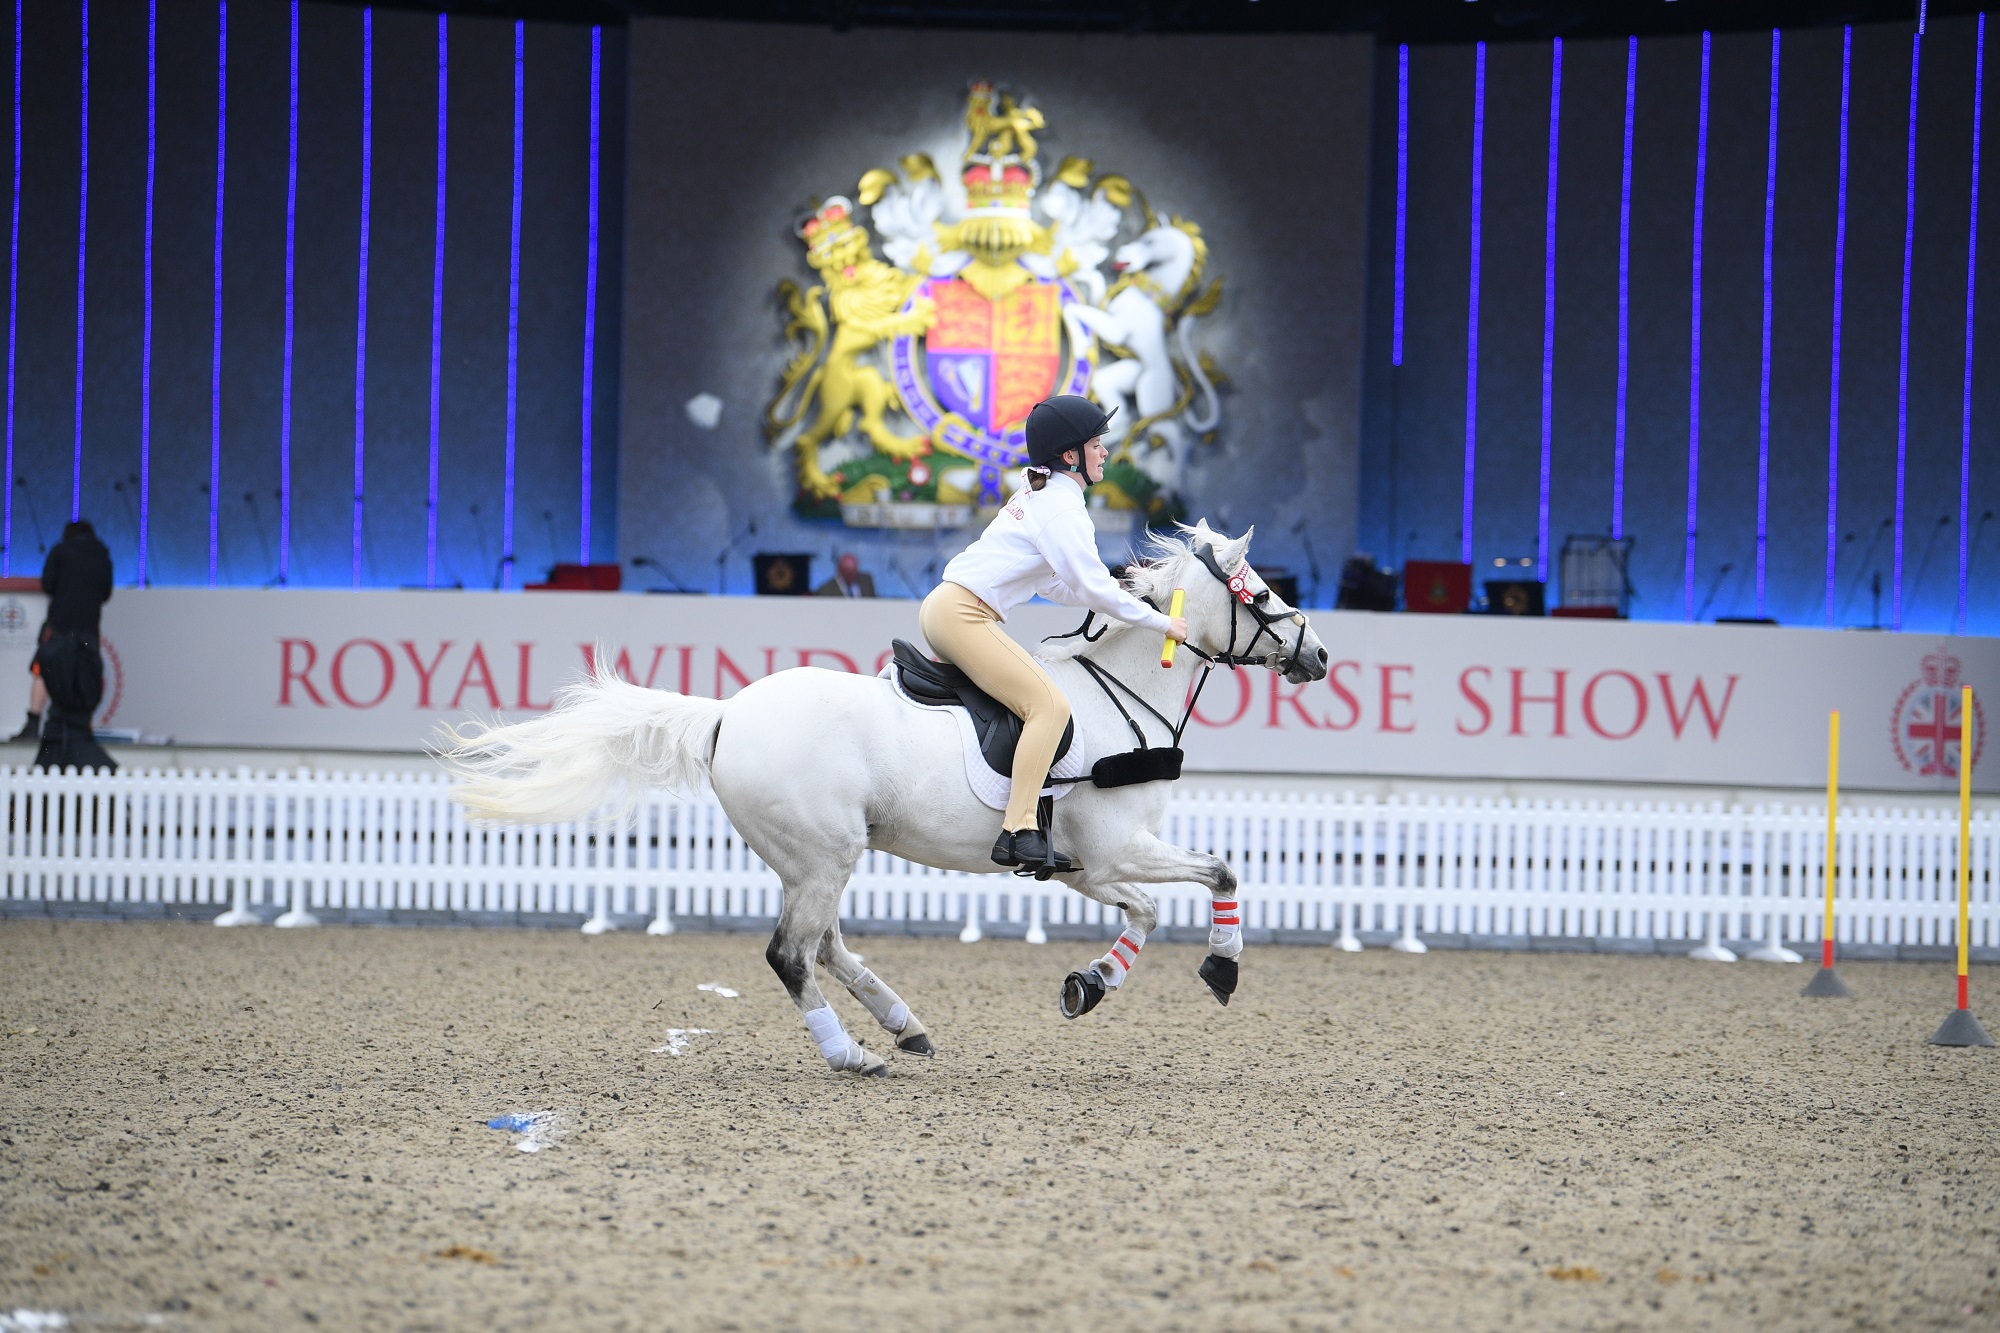 Young rider on a white horse indoors at the Royal Windsor Horse Show.